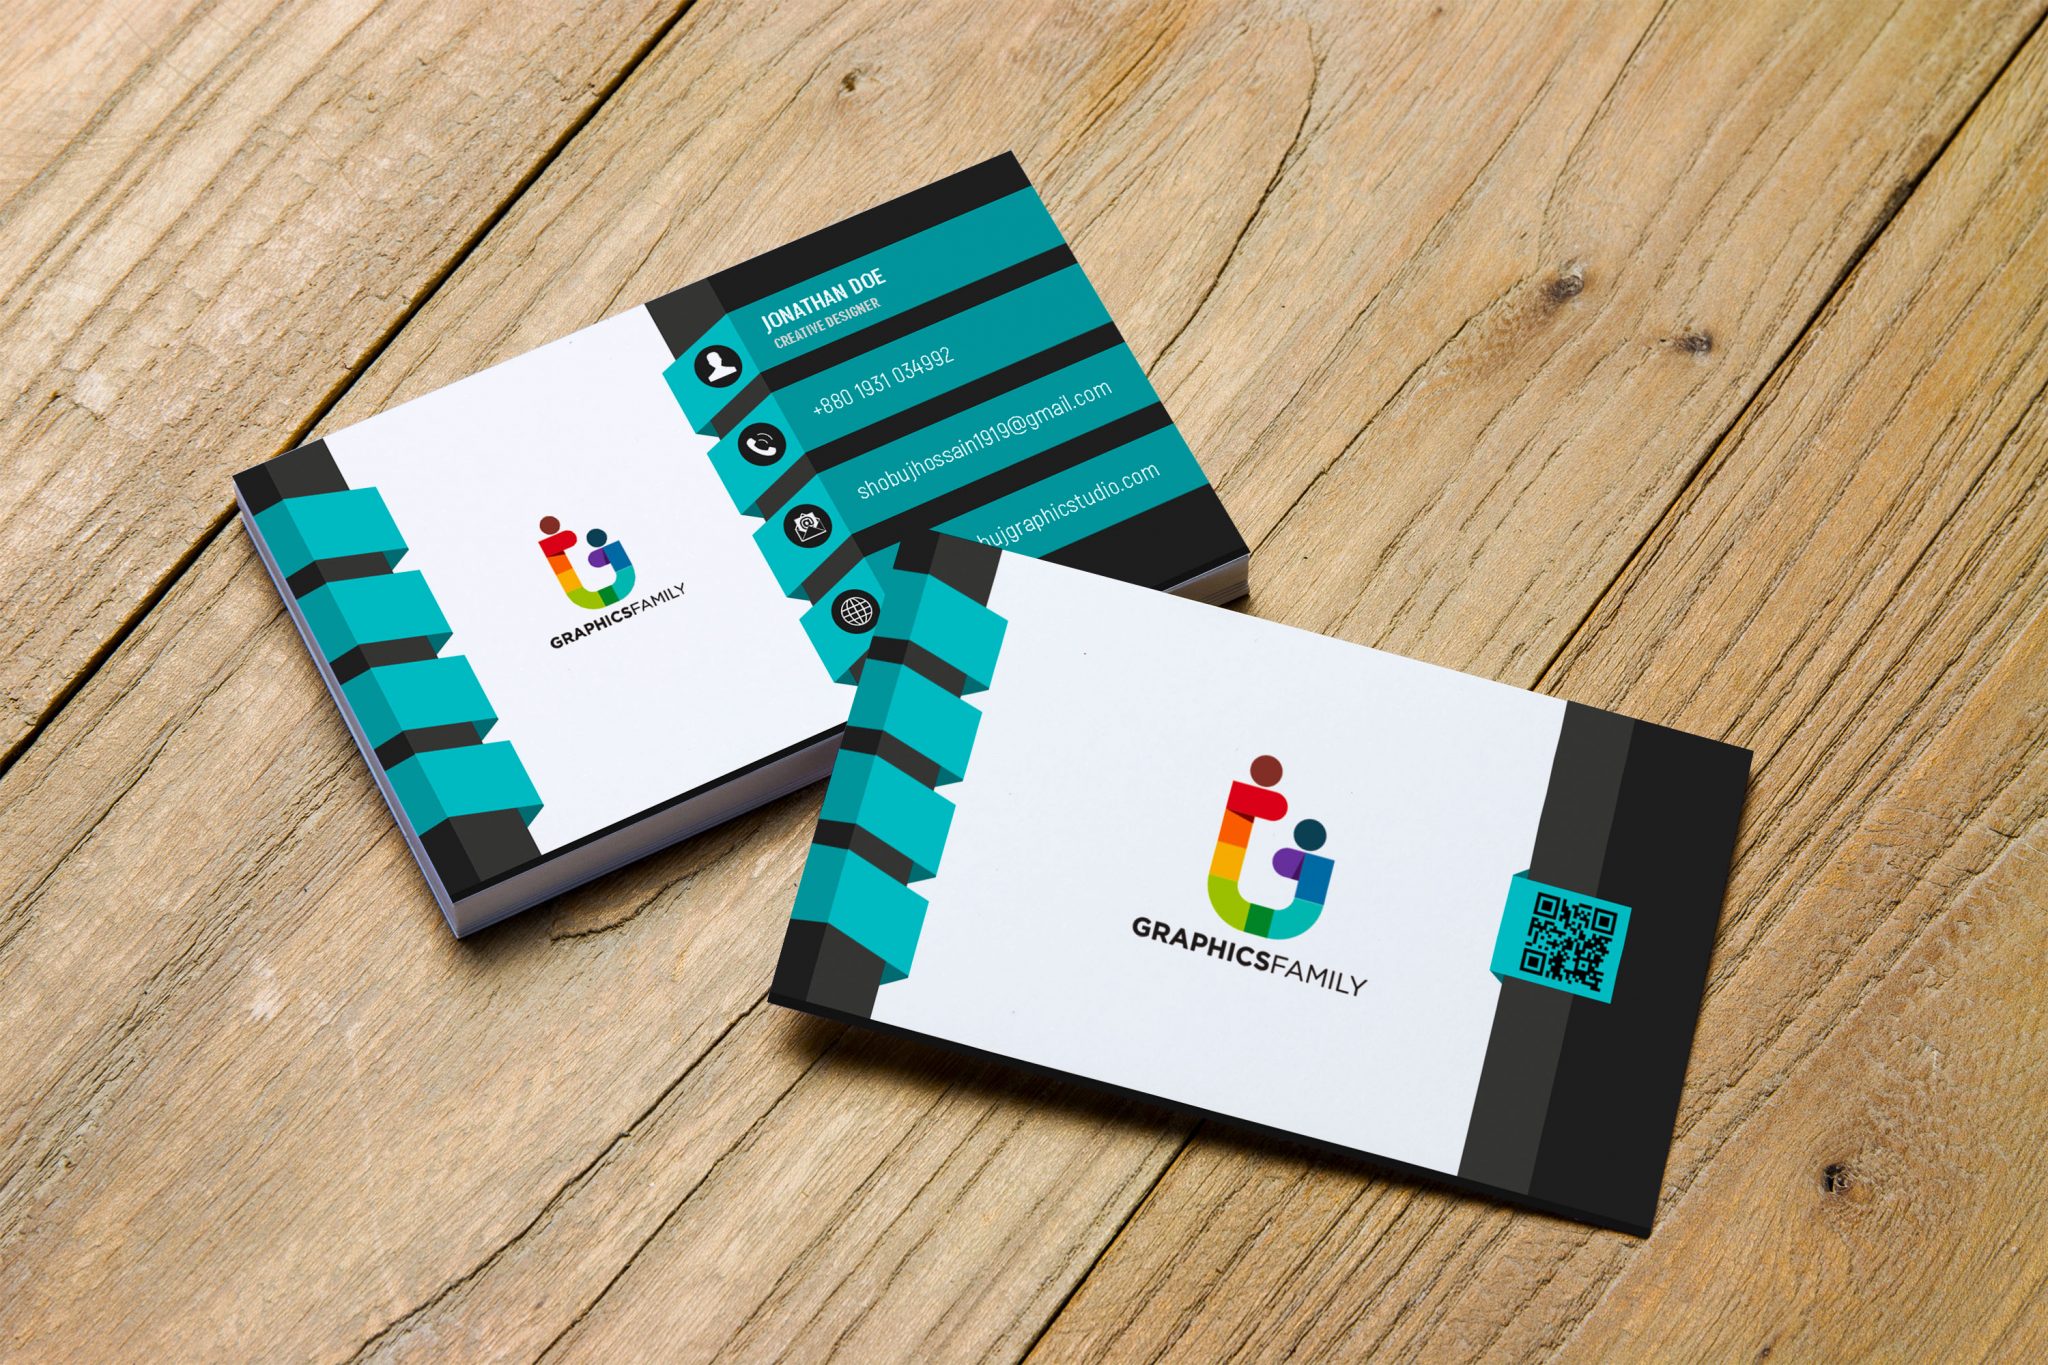 3D Creative Designer Business Card Template – GraphicsFamily